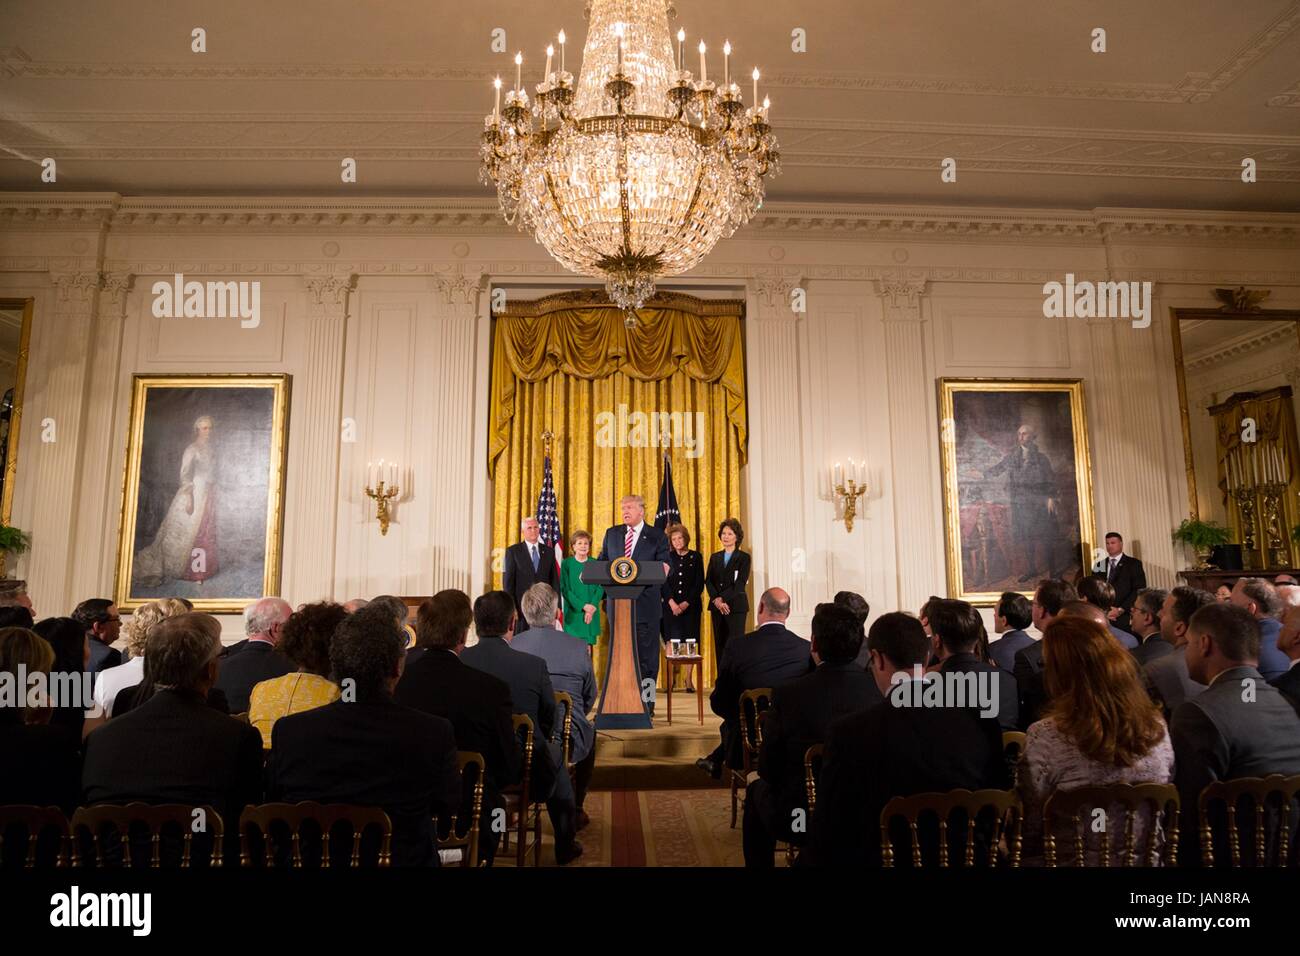 U.S. President Donald Trump announces his plan on the privatization of the air traffic control system in the East Room of the White House June 5, 2017 in Washington, DC.  Privatization Of The Air Traffic Control System Stock Photo